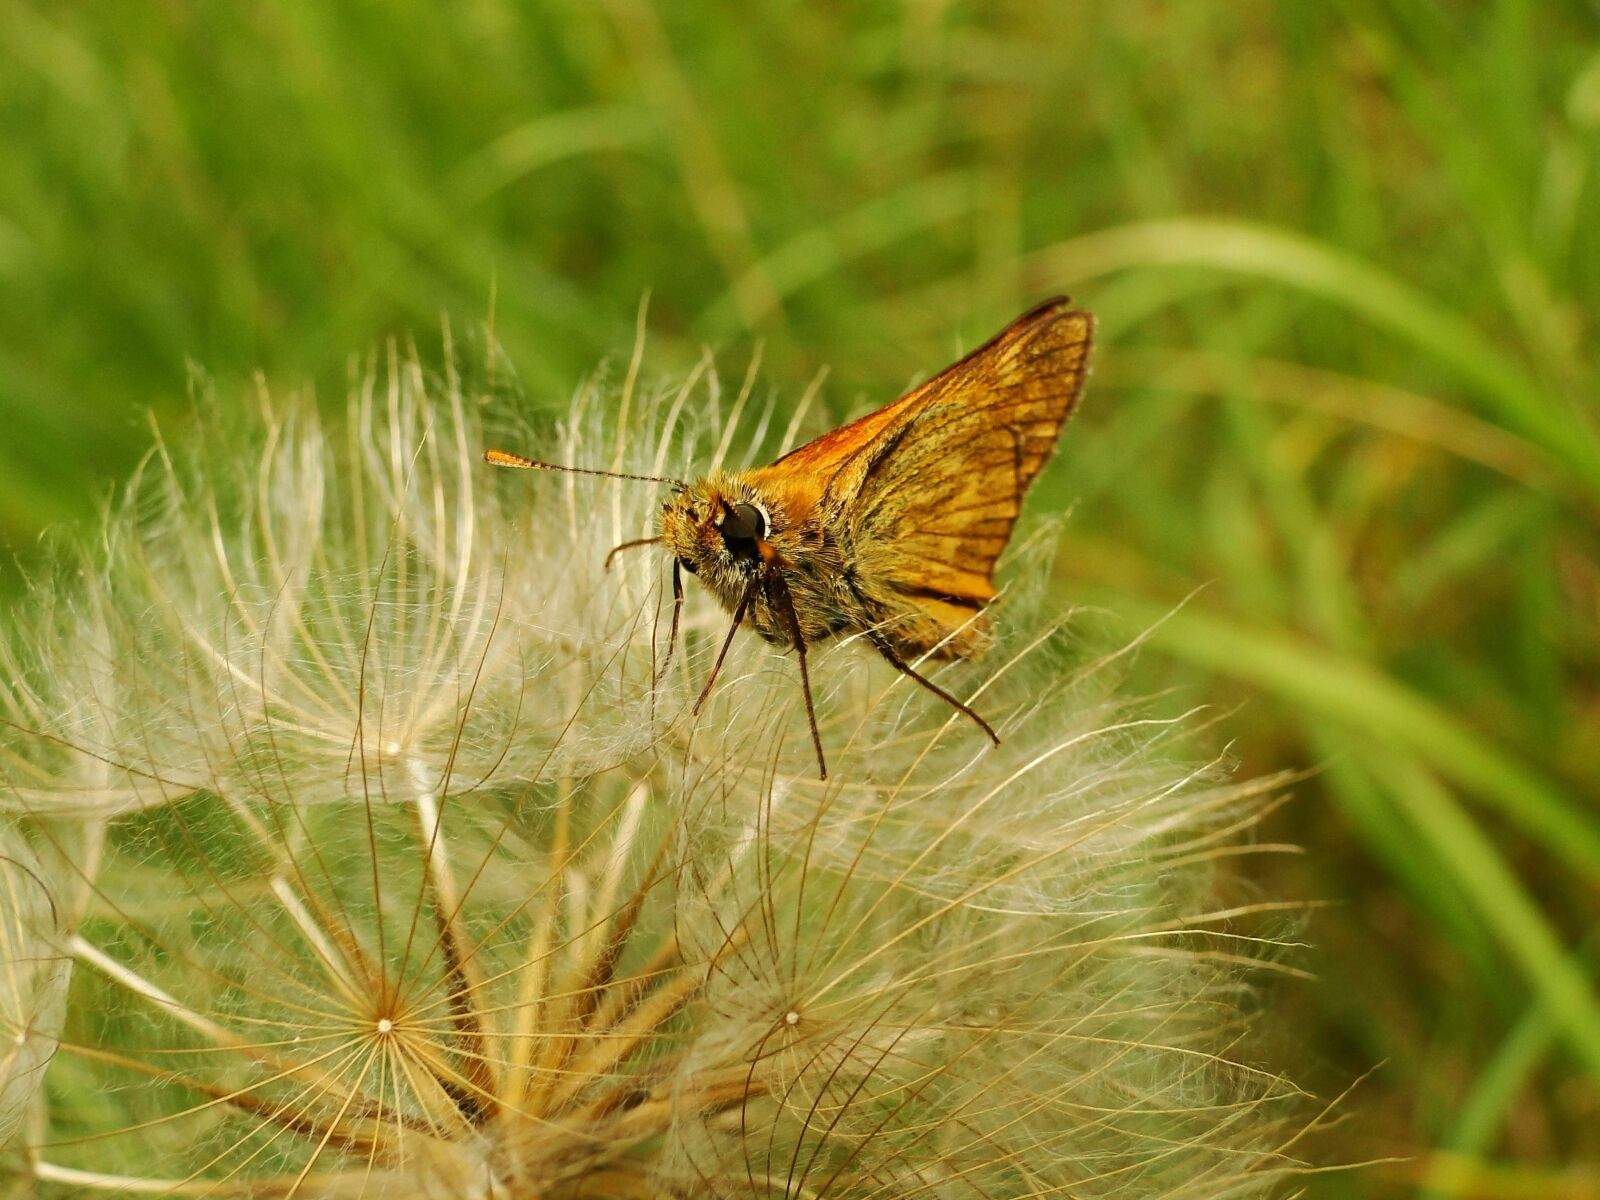 Sony Cyber-shot DSC-HX1 sample photo. Nature, insect, butterfly day photography